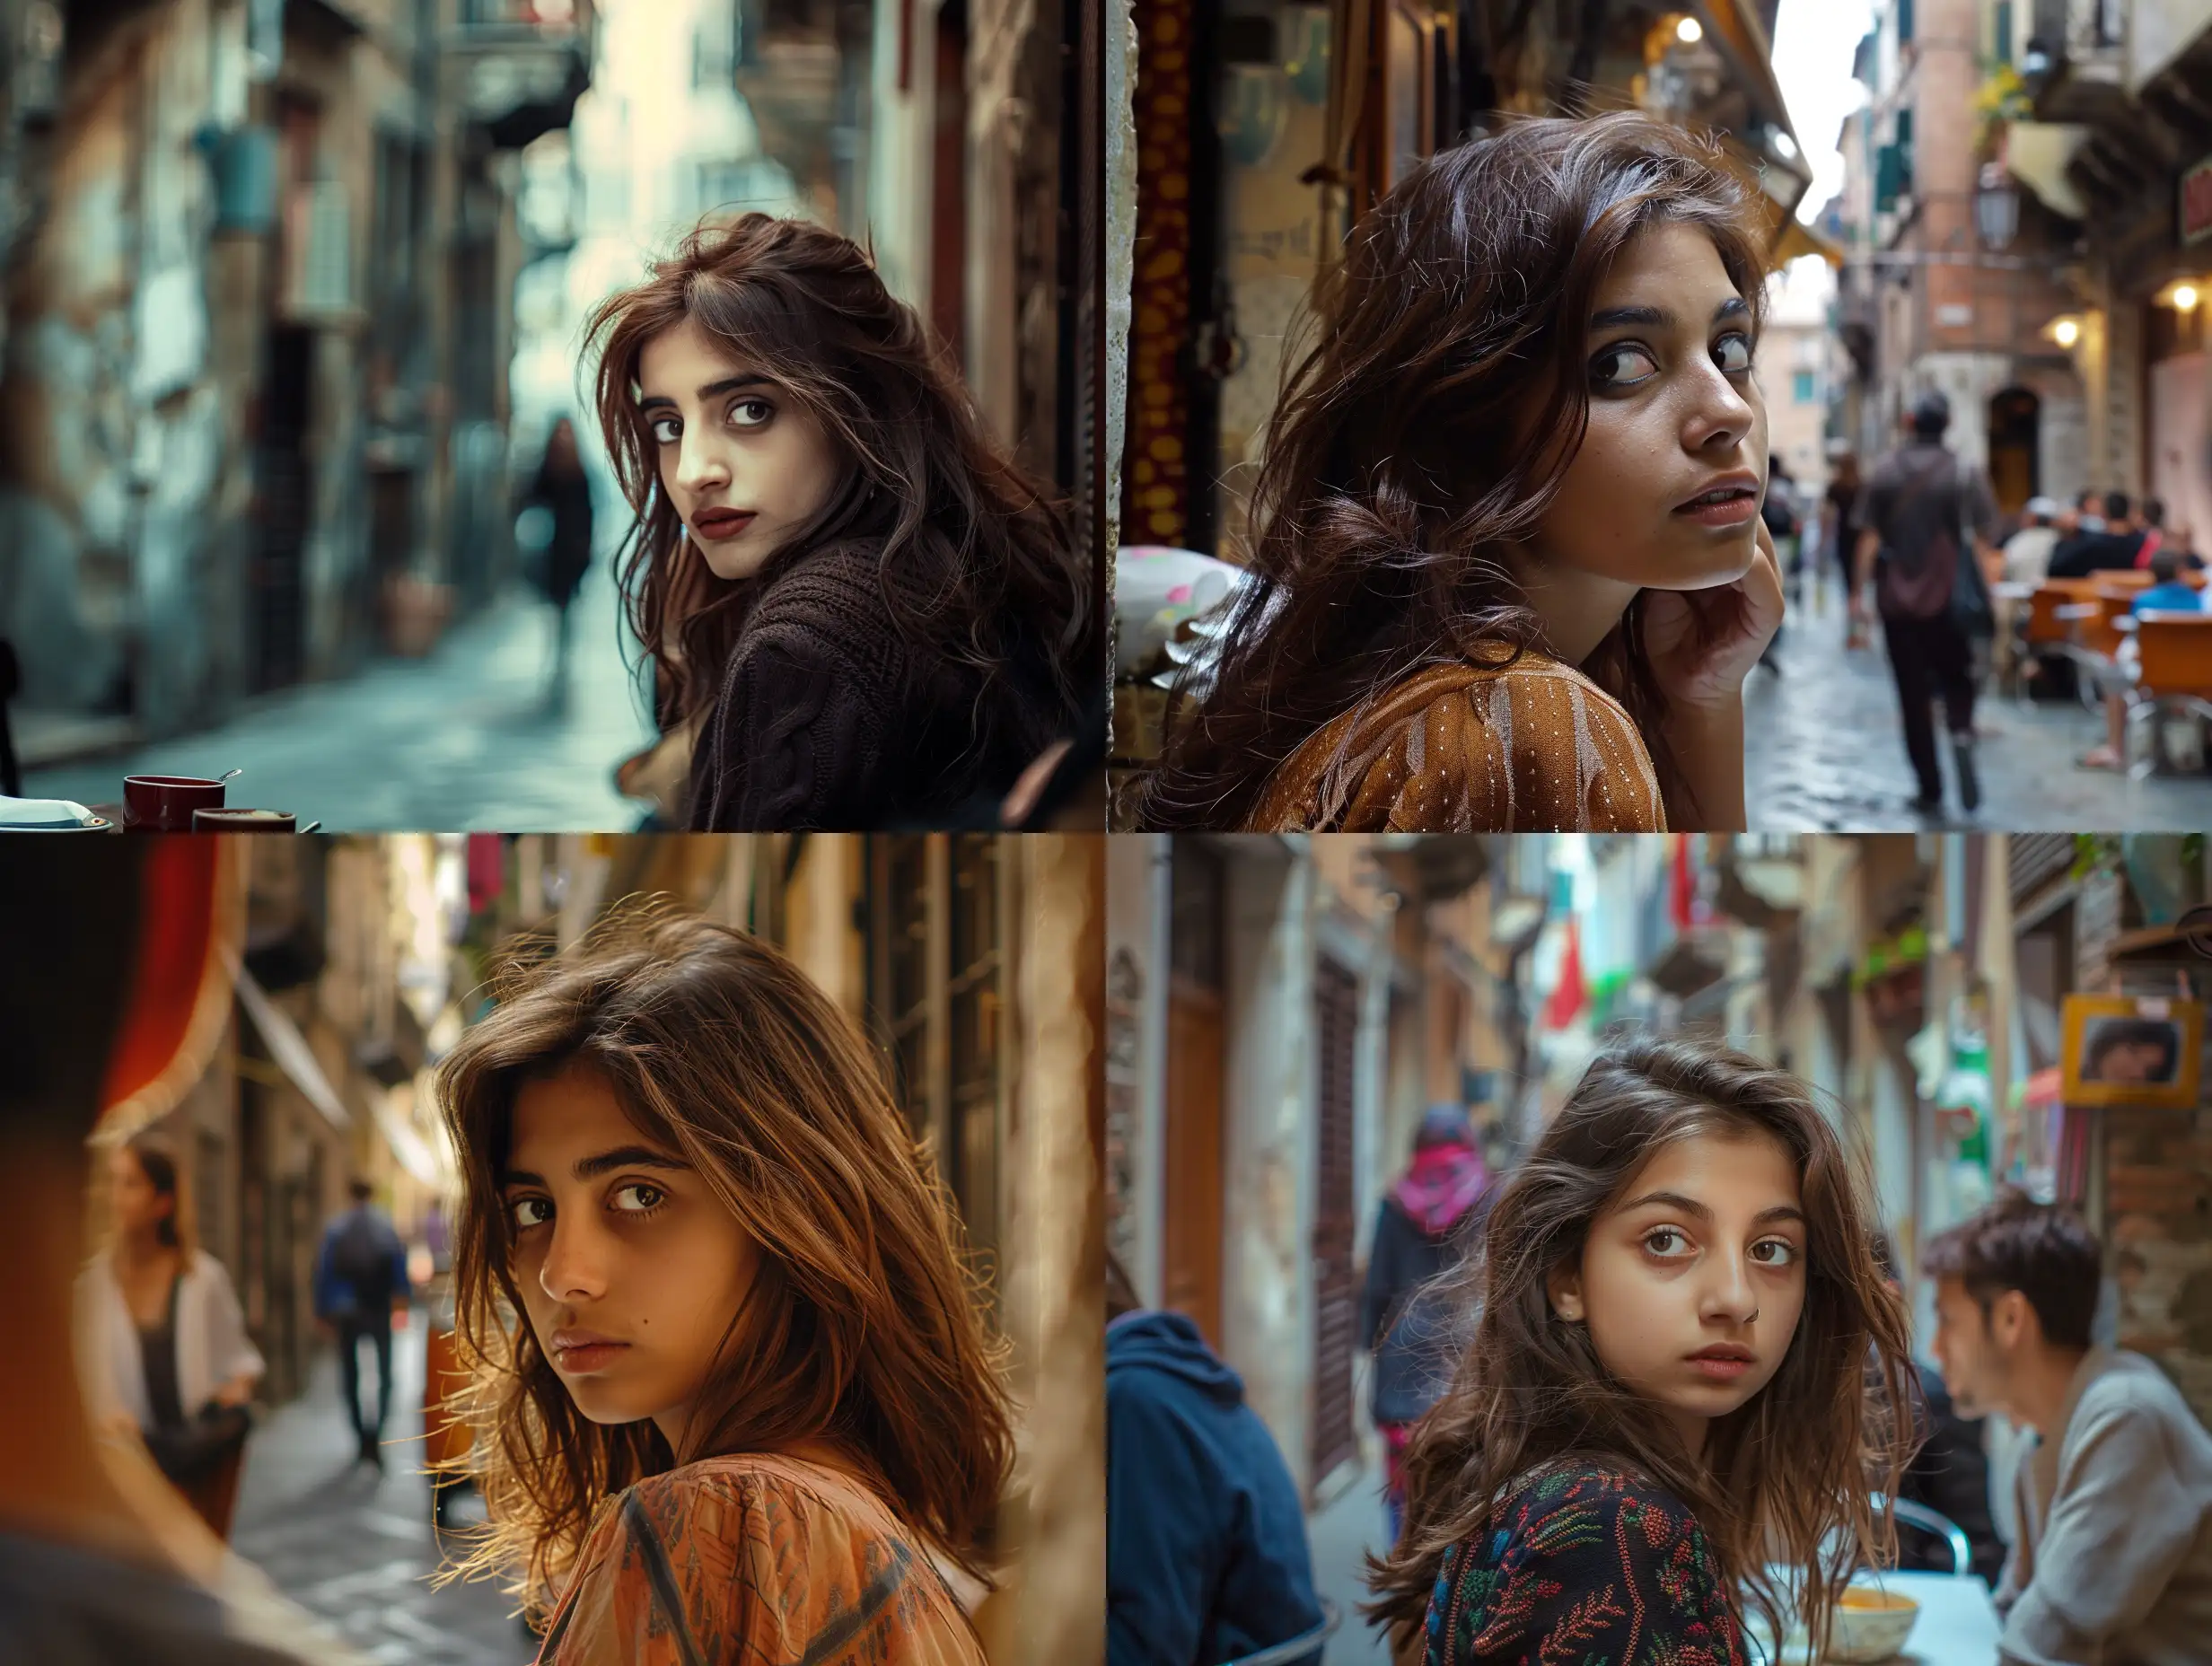 Girl-with-Gypsy-Brown-Hair-Observing-Passersby-in-Italian-Caf-Alley